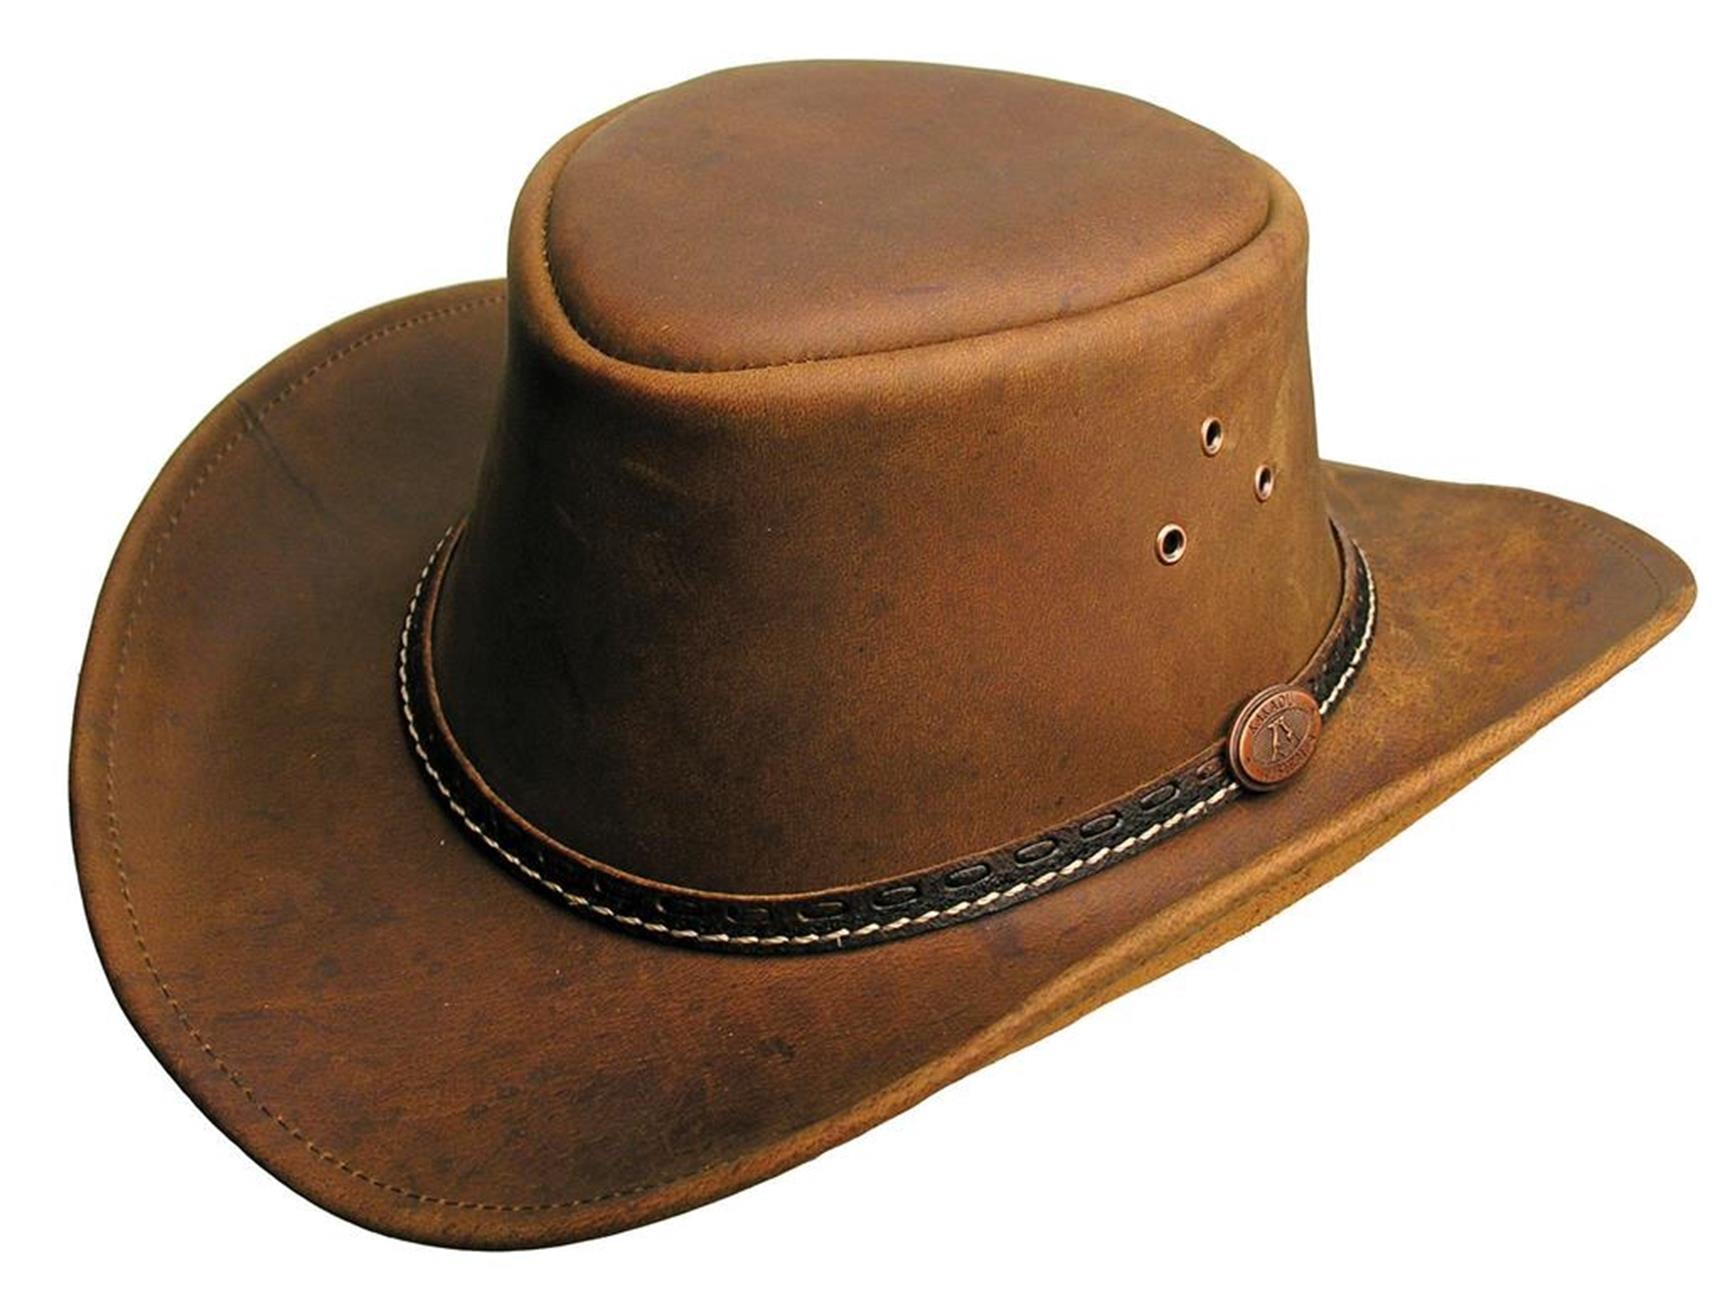 Australian cowboy lederhut with formable clamp-robust allwetter hat,  waterproof with high UV protection for women and men – Outbacker